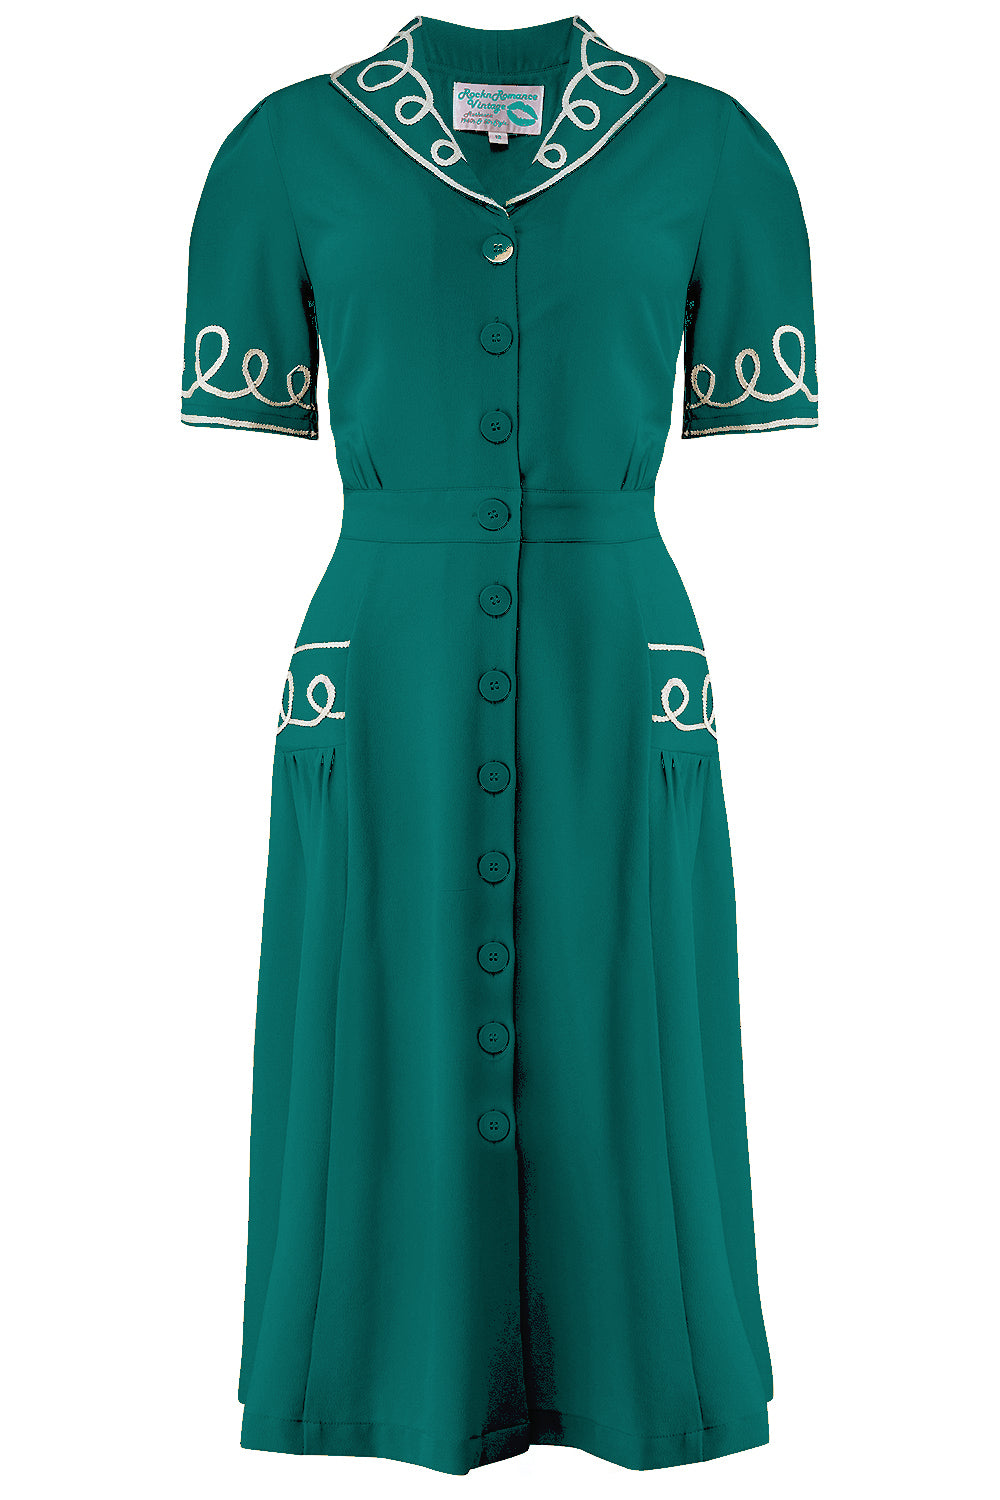 1940s Tea Dresses, Mature, Mrs. Long Sleeve Dresses The Loopy-Lou Shirtwaister Dress in Teal with Contrast RicRac True 1950s Vintage Style £49.95 AT vintagedancer.com